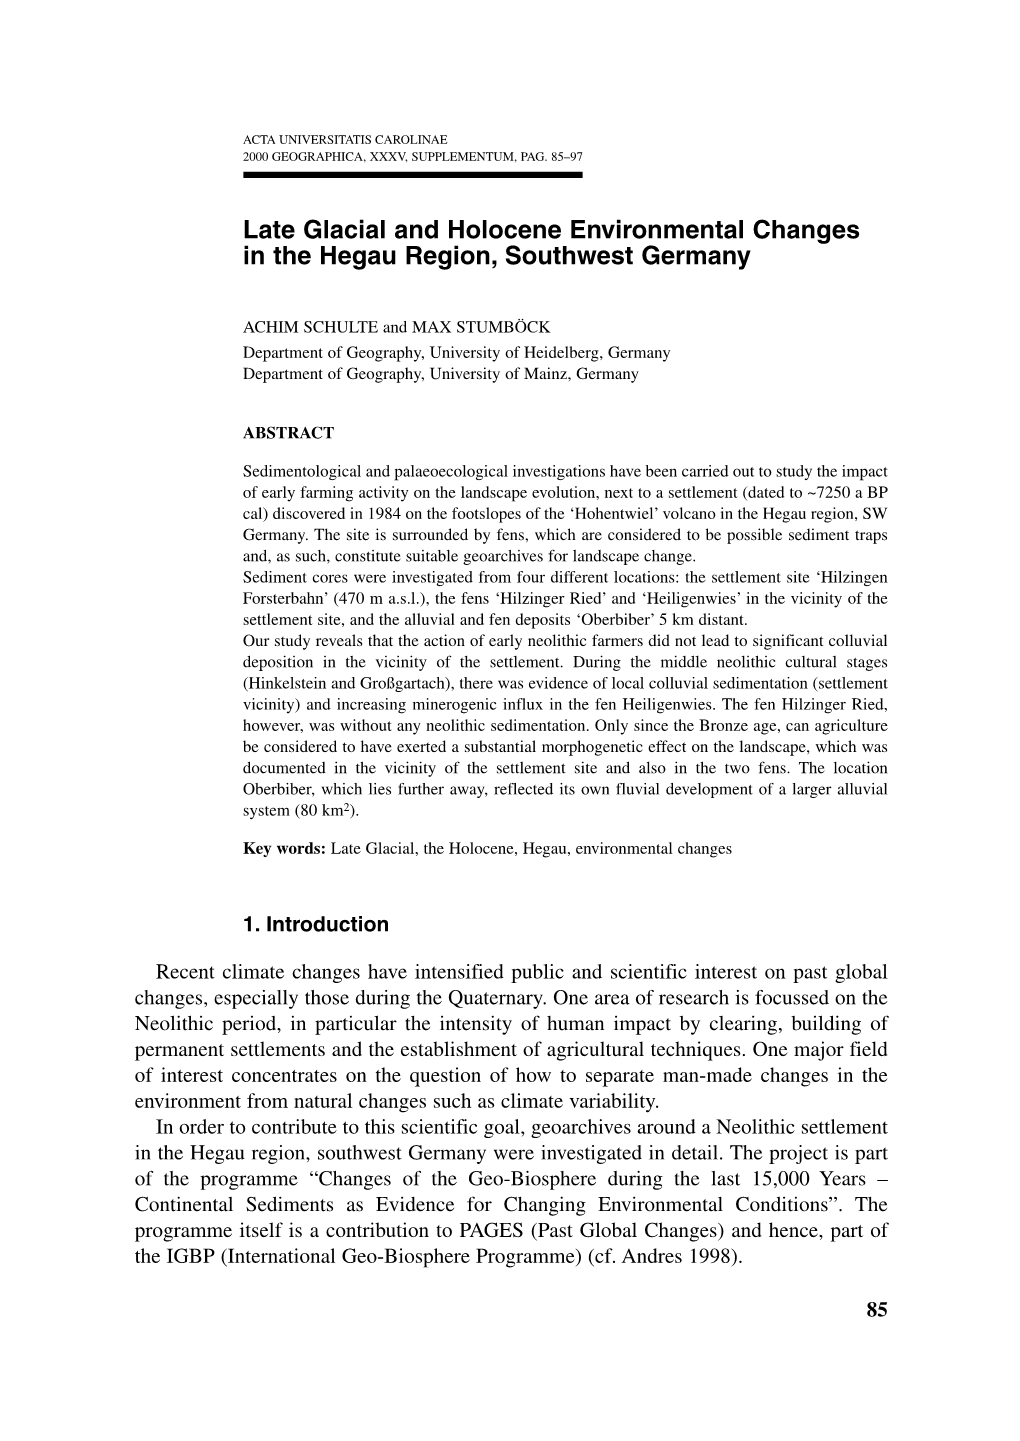 Late Glacial and Holocene Environmental Changes in the Hegau Region, Southwest Germany